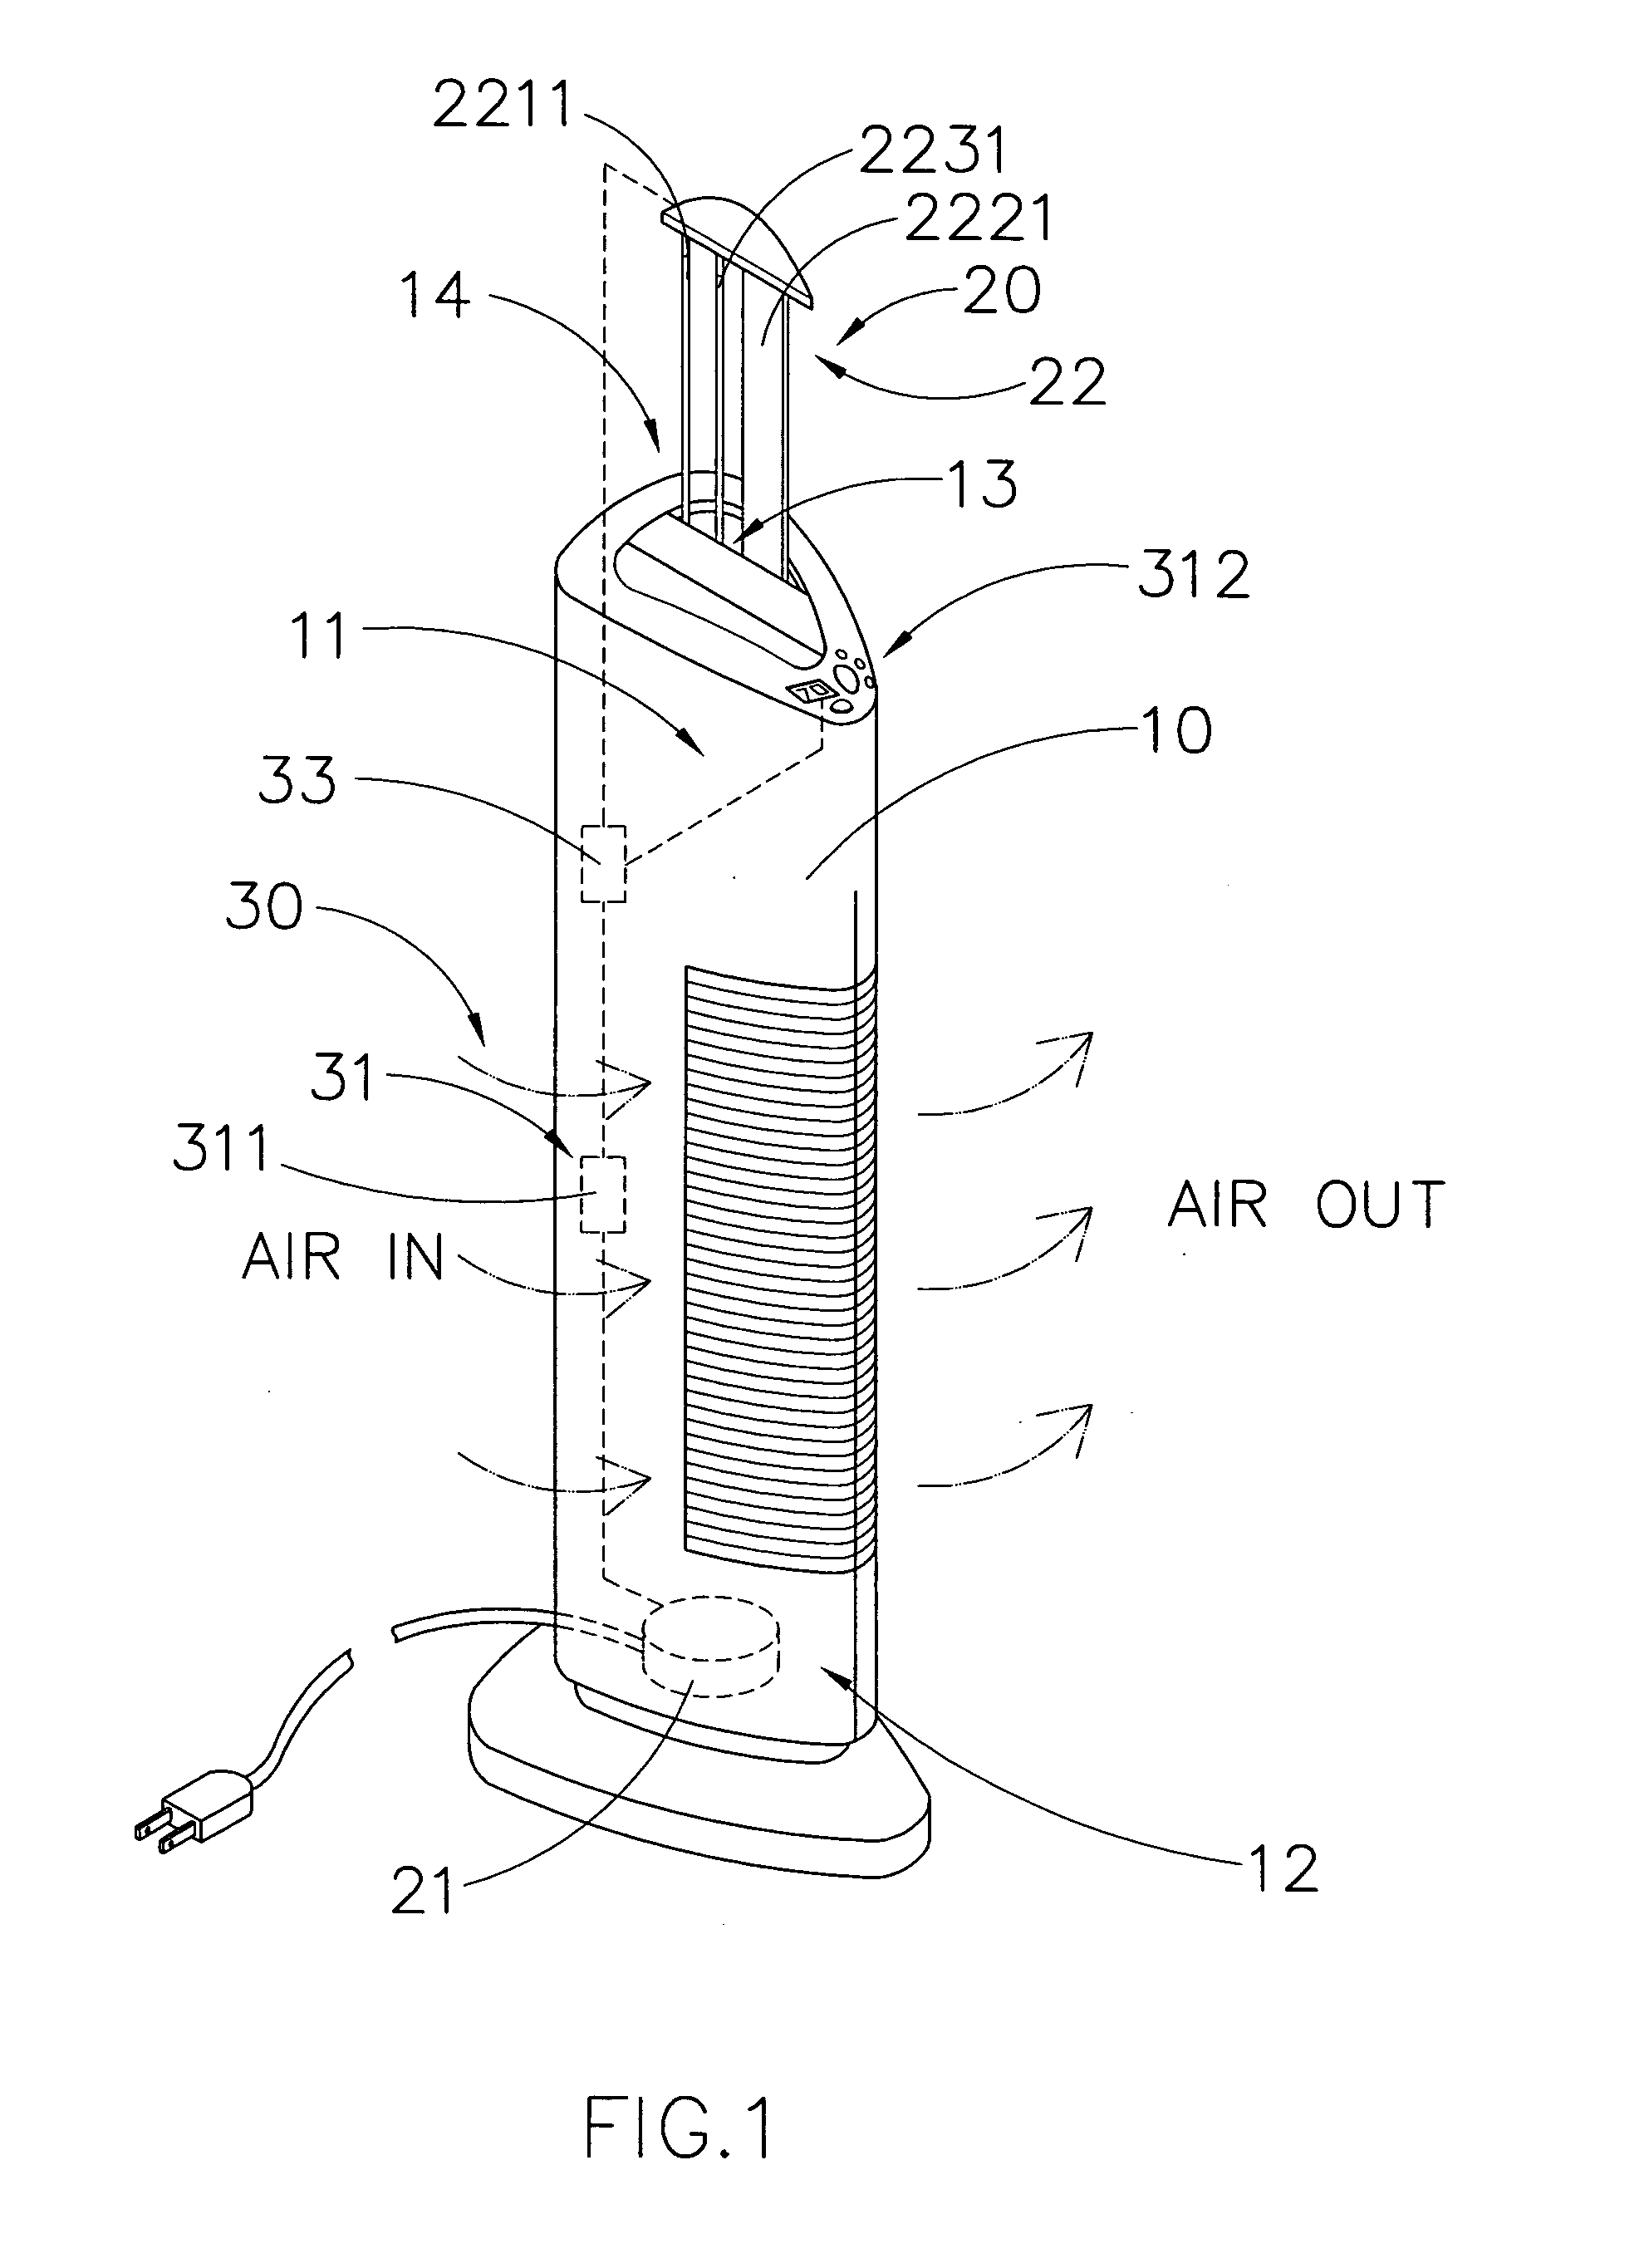 Air purifier with ozone reduction arrangement